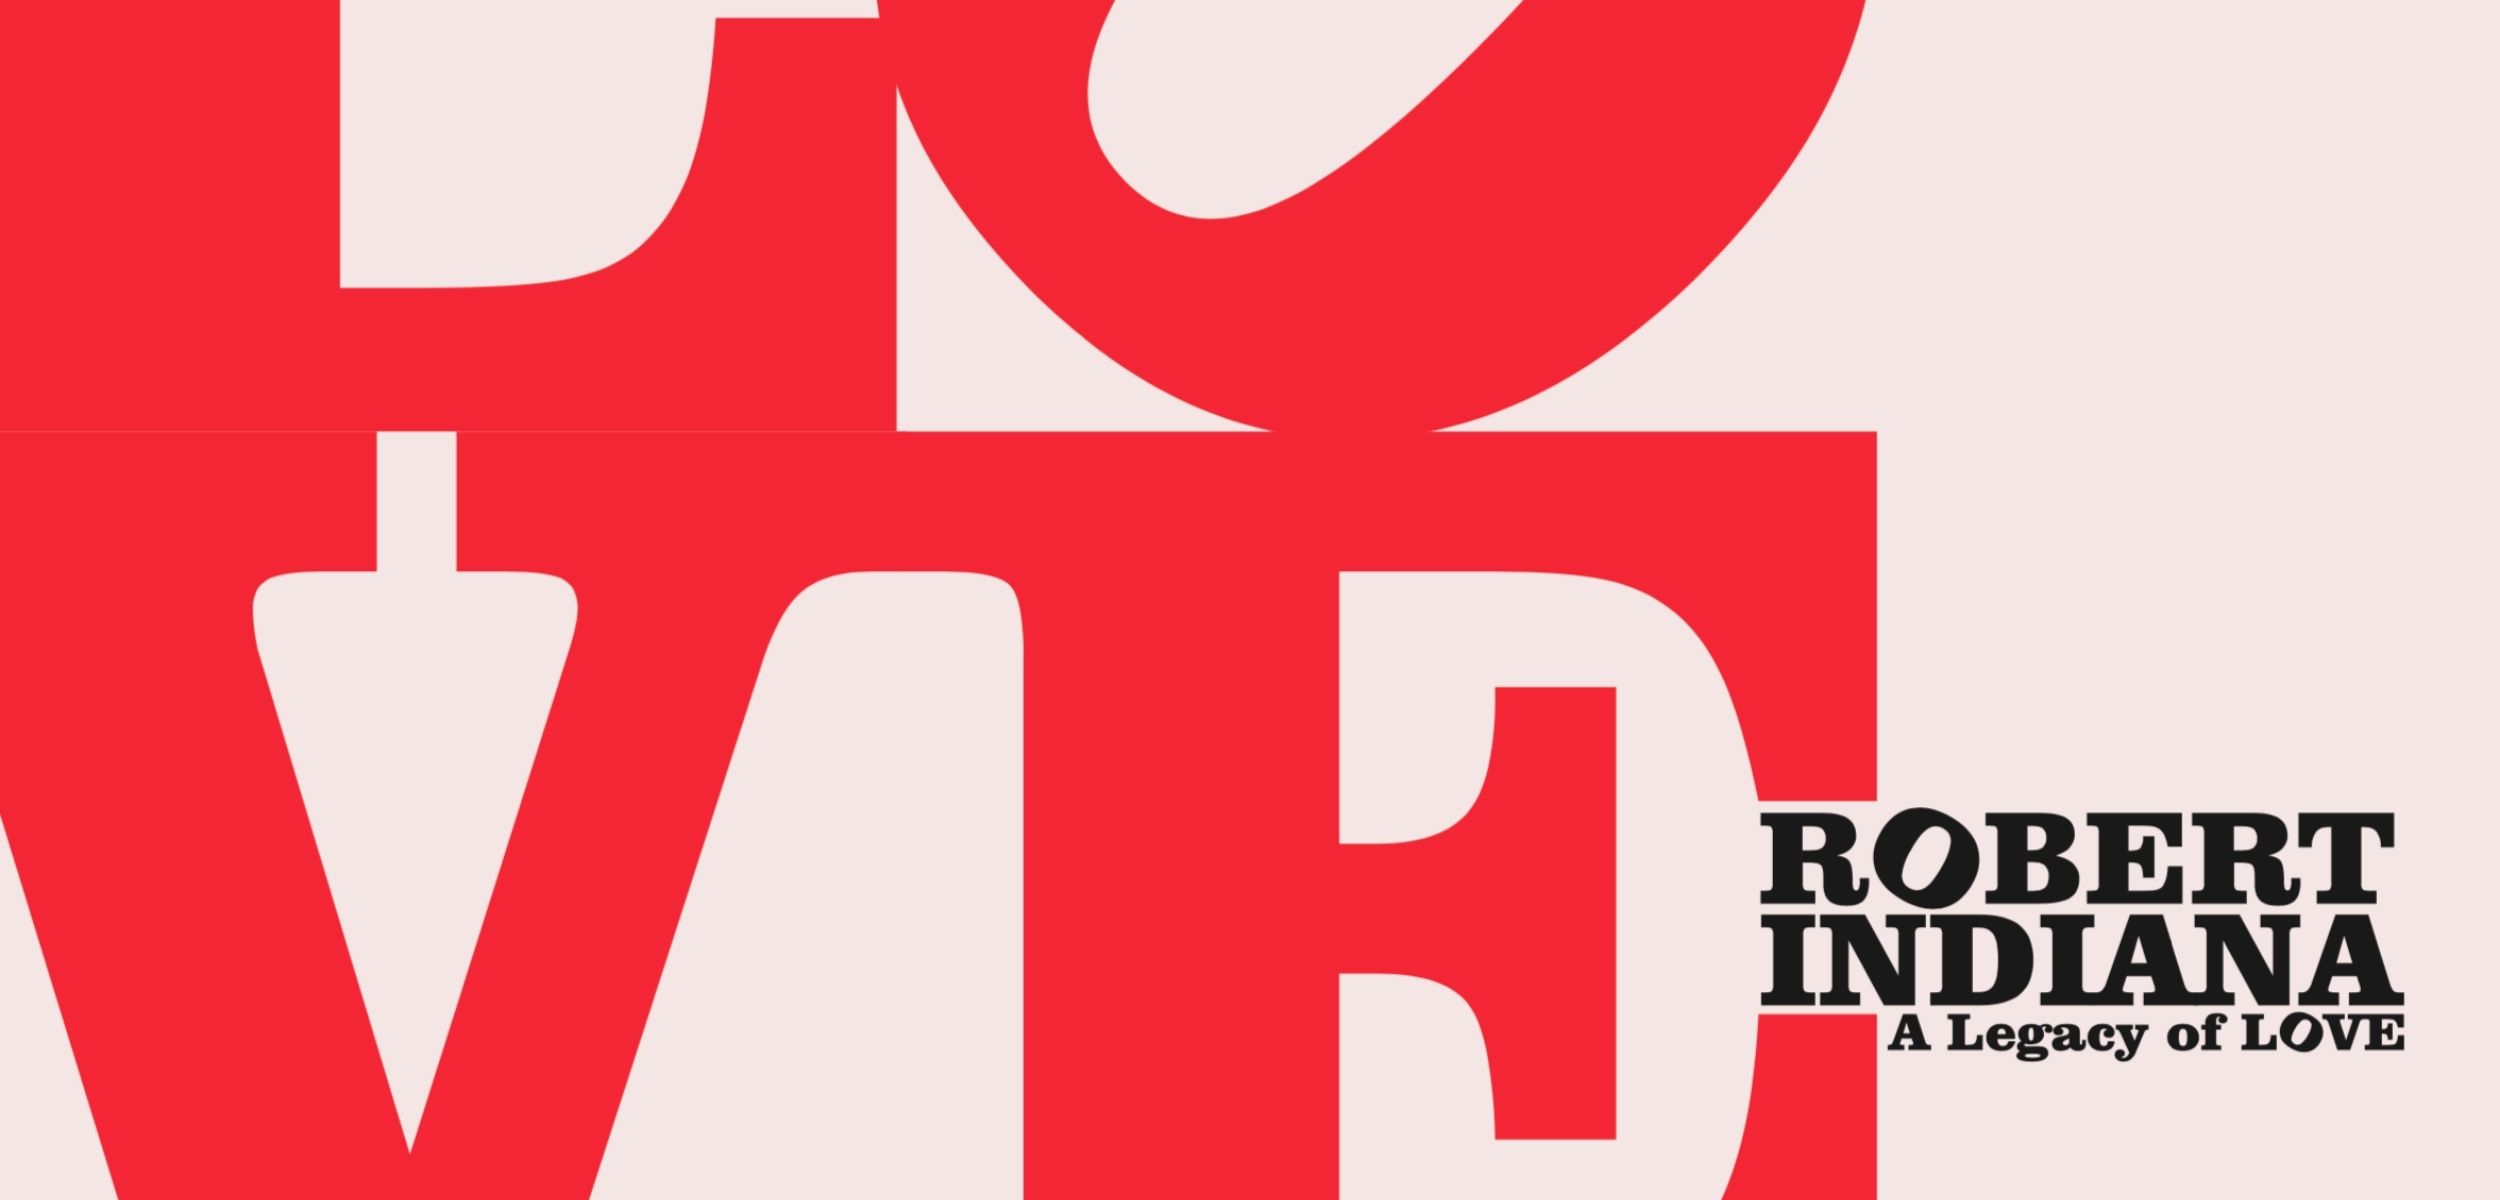 Call for Submissions: In Celebration of Pop Artist Robert Indiana